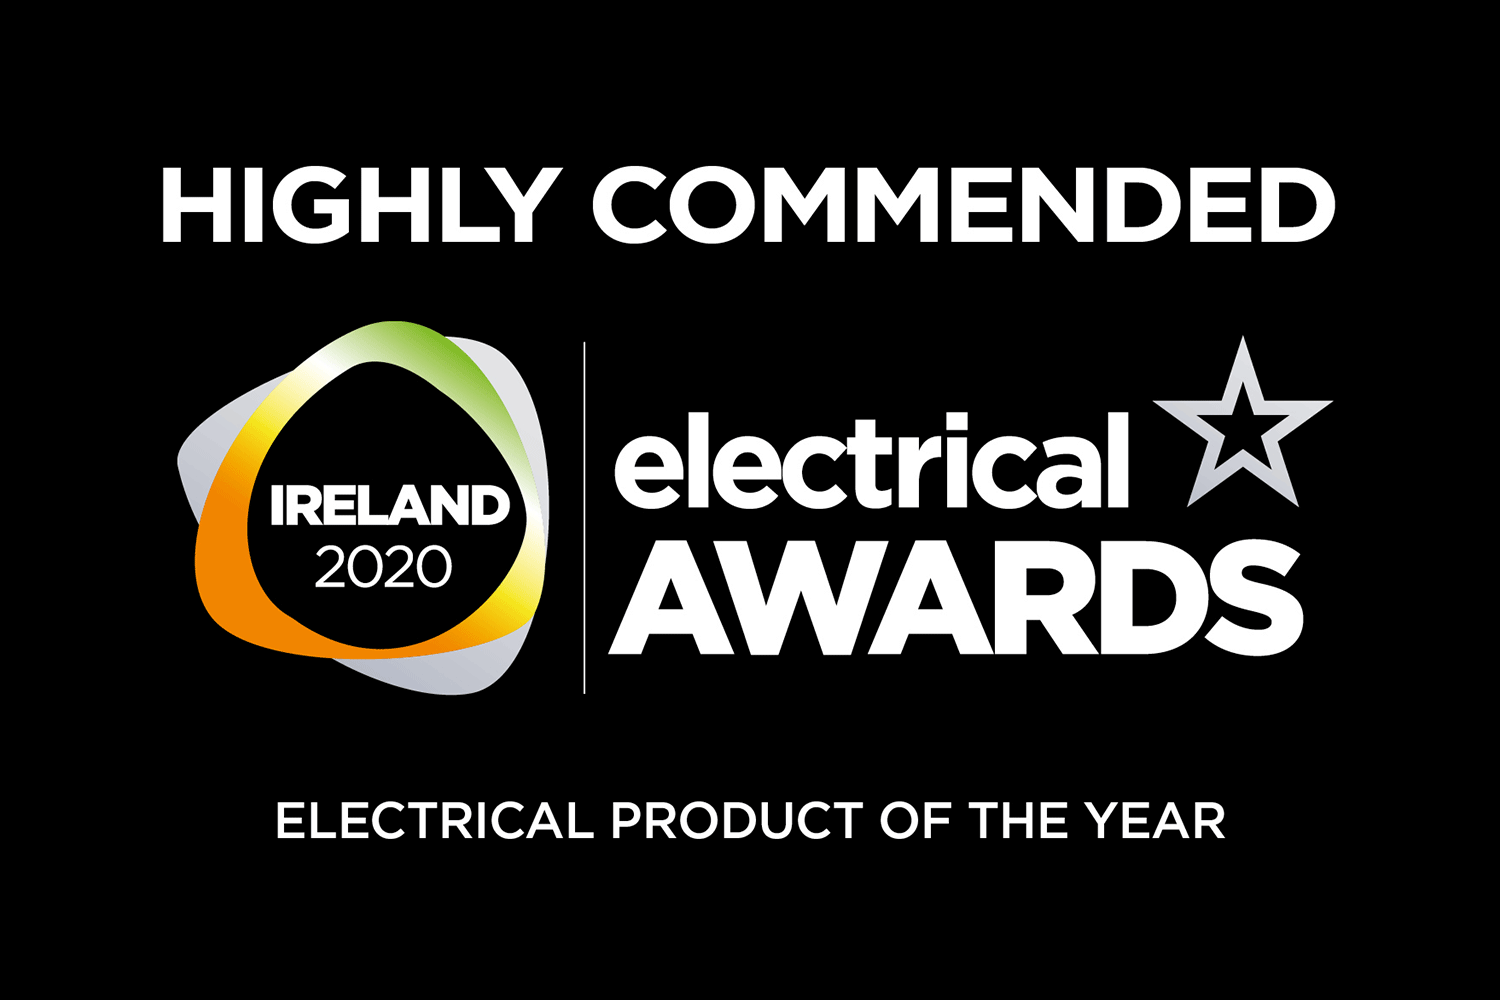 Success at the 2020 Electrical Awards